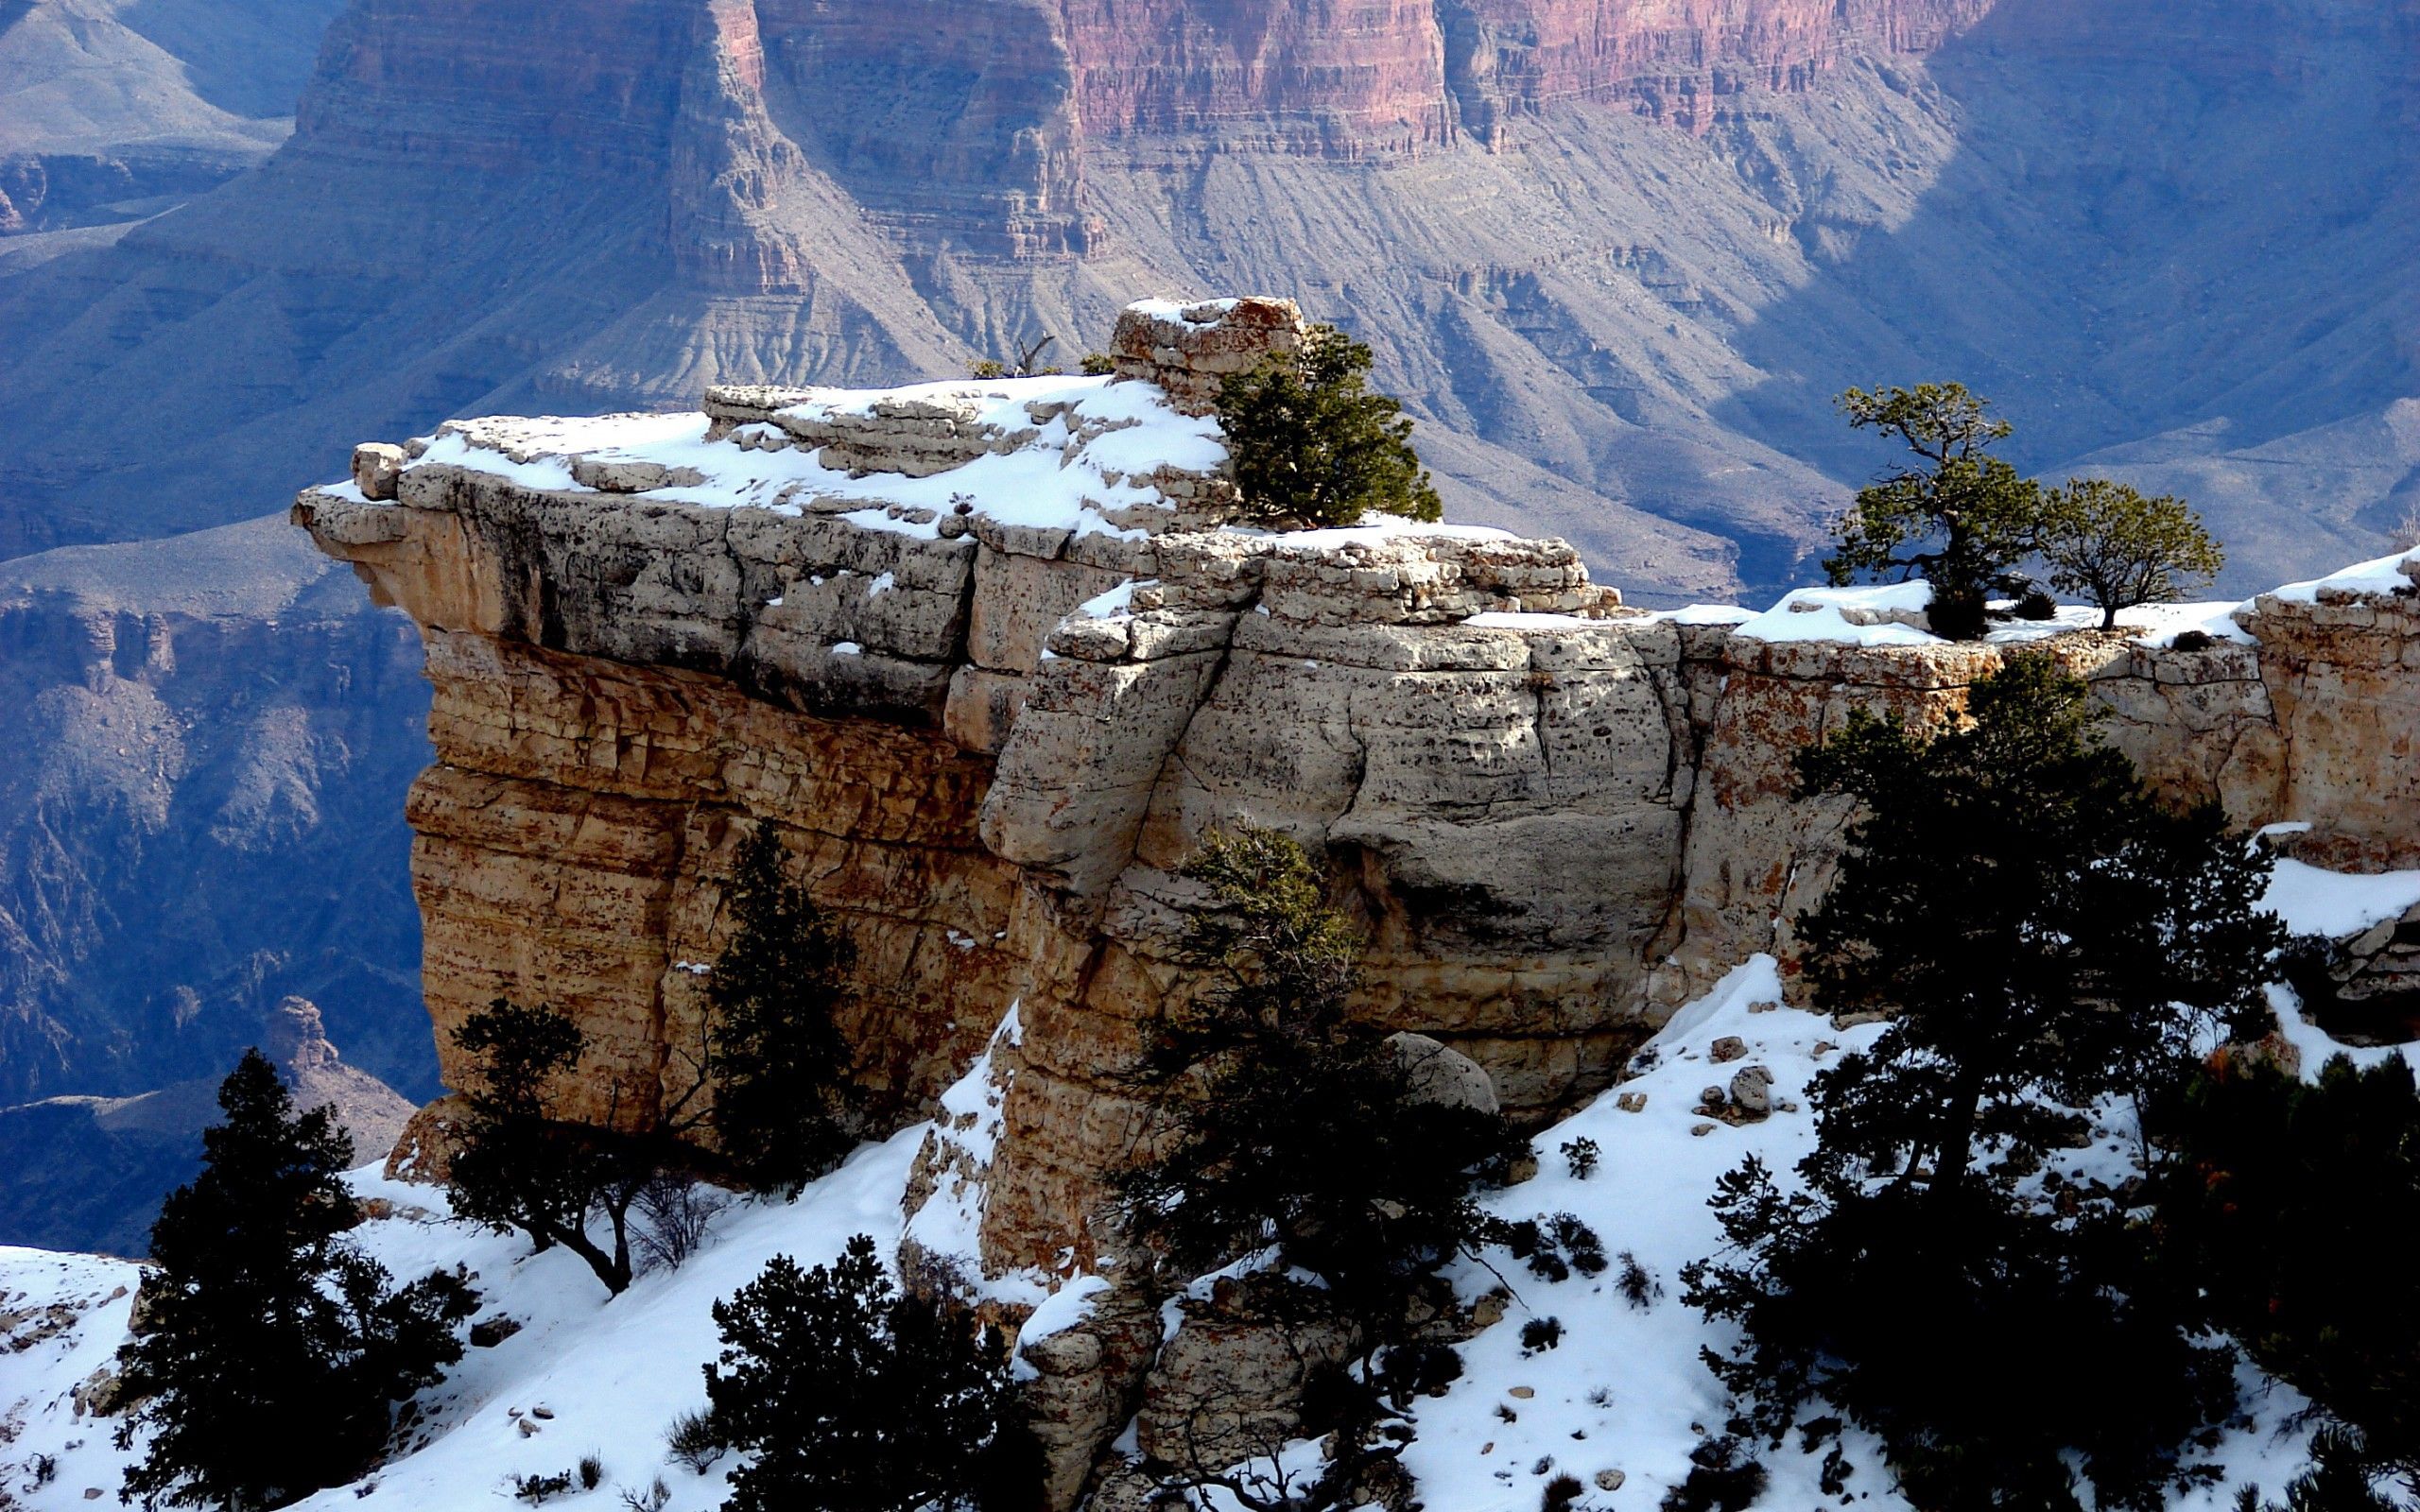 Hdwallpaper87.com The Grand Canyon During Winter Desktop Wallpaper. Free The Grand Canyon During Winter Phone Background Image